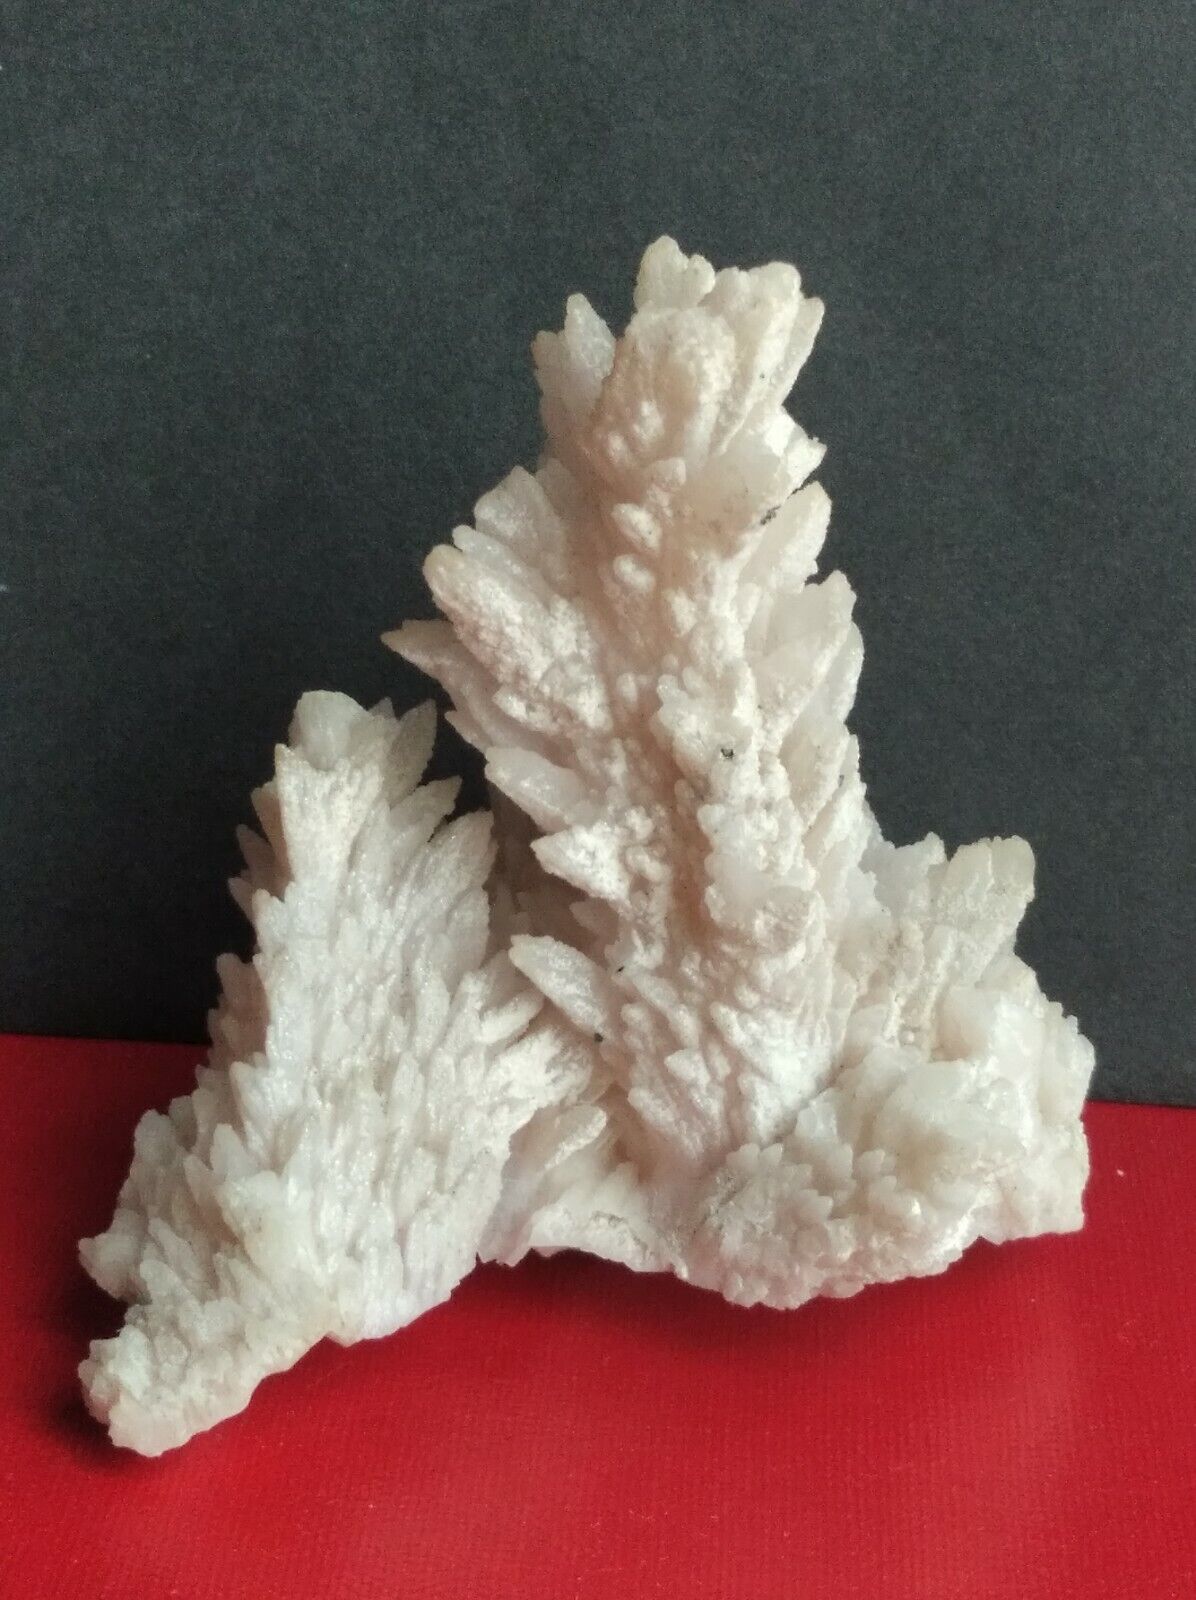 INTERESTING CRYSTAL, MINERAL UNCHECKED 48GR